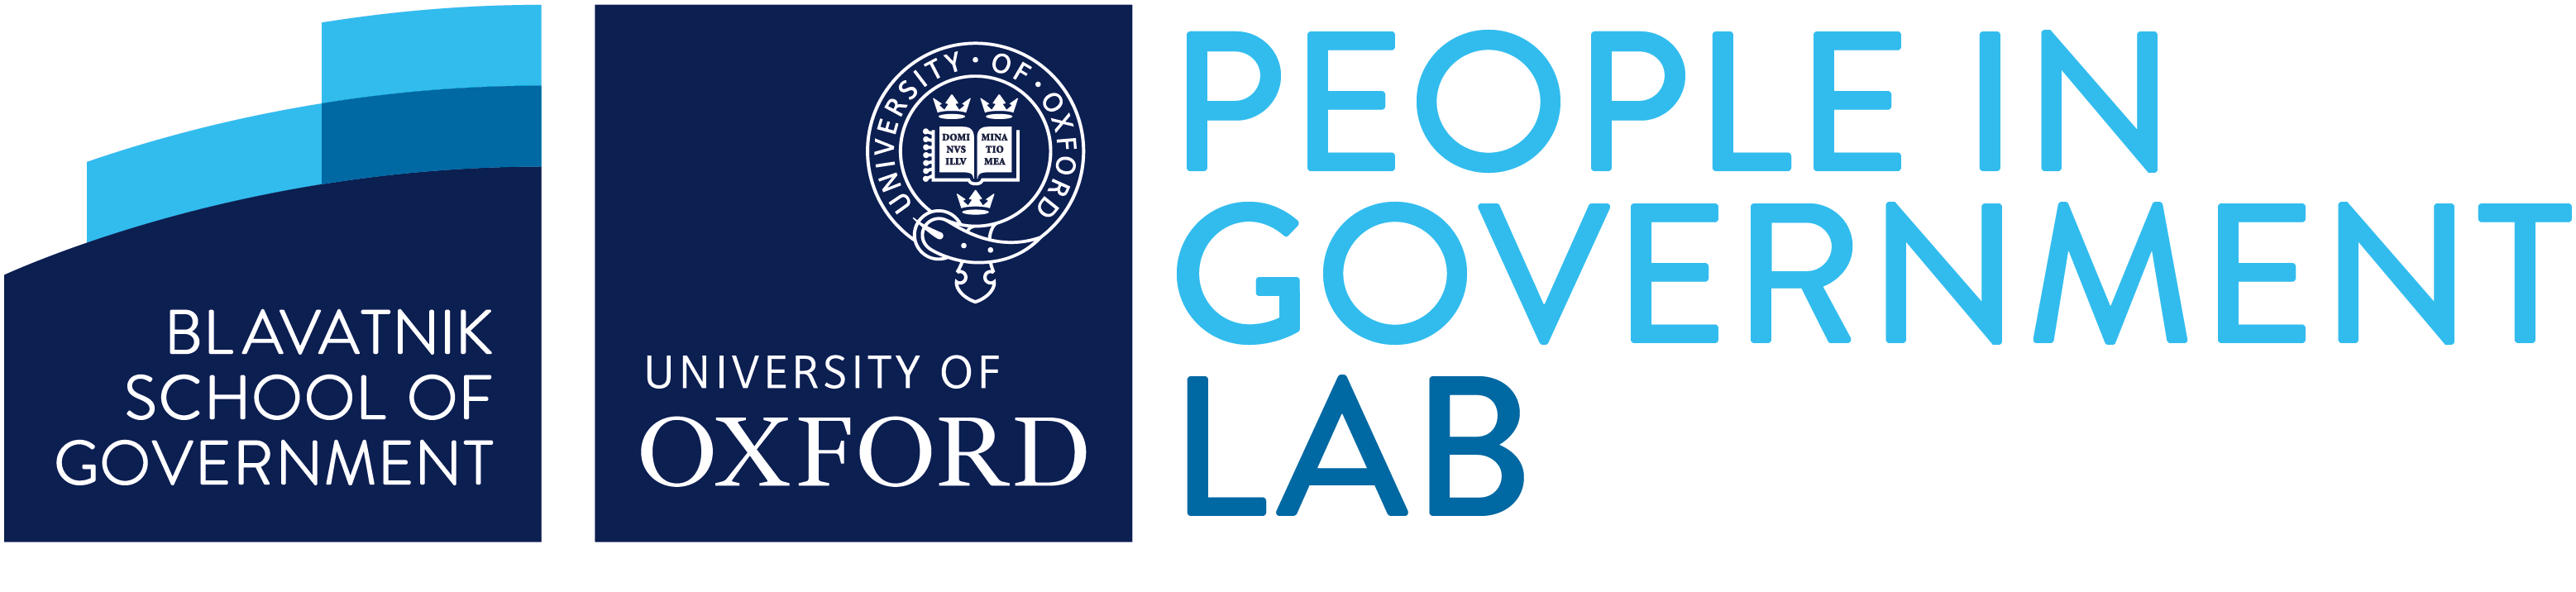 People in Government Lab logo